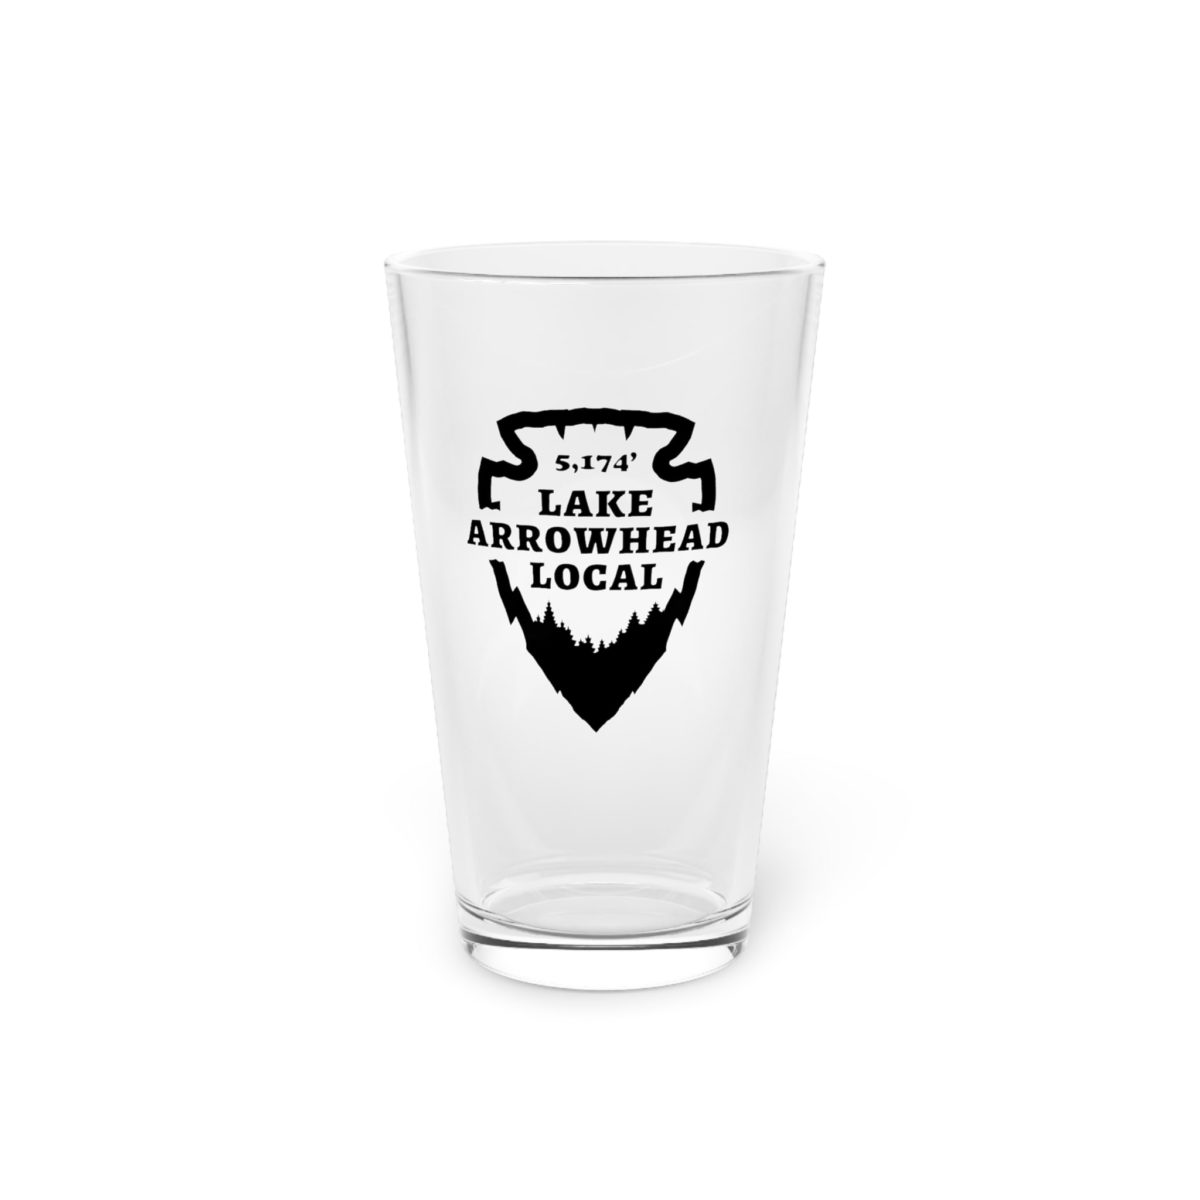 Lake Arrowhead Local beer glass with our signature arrowhead and the elevation.